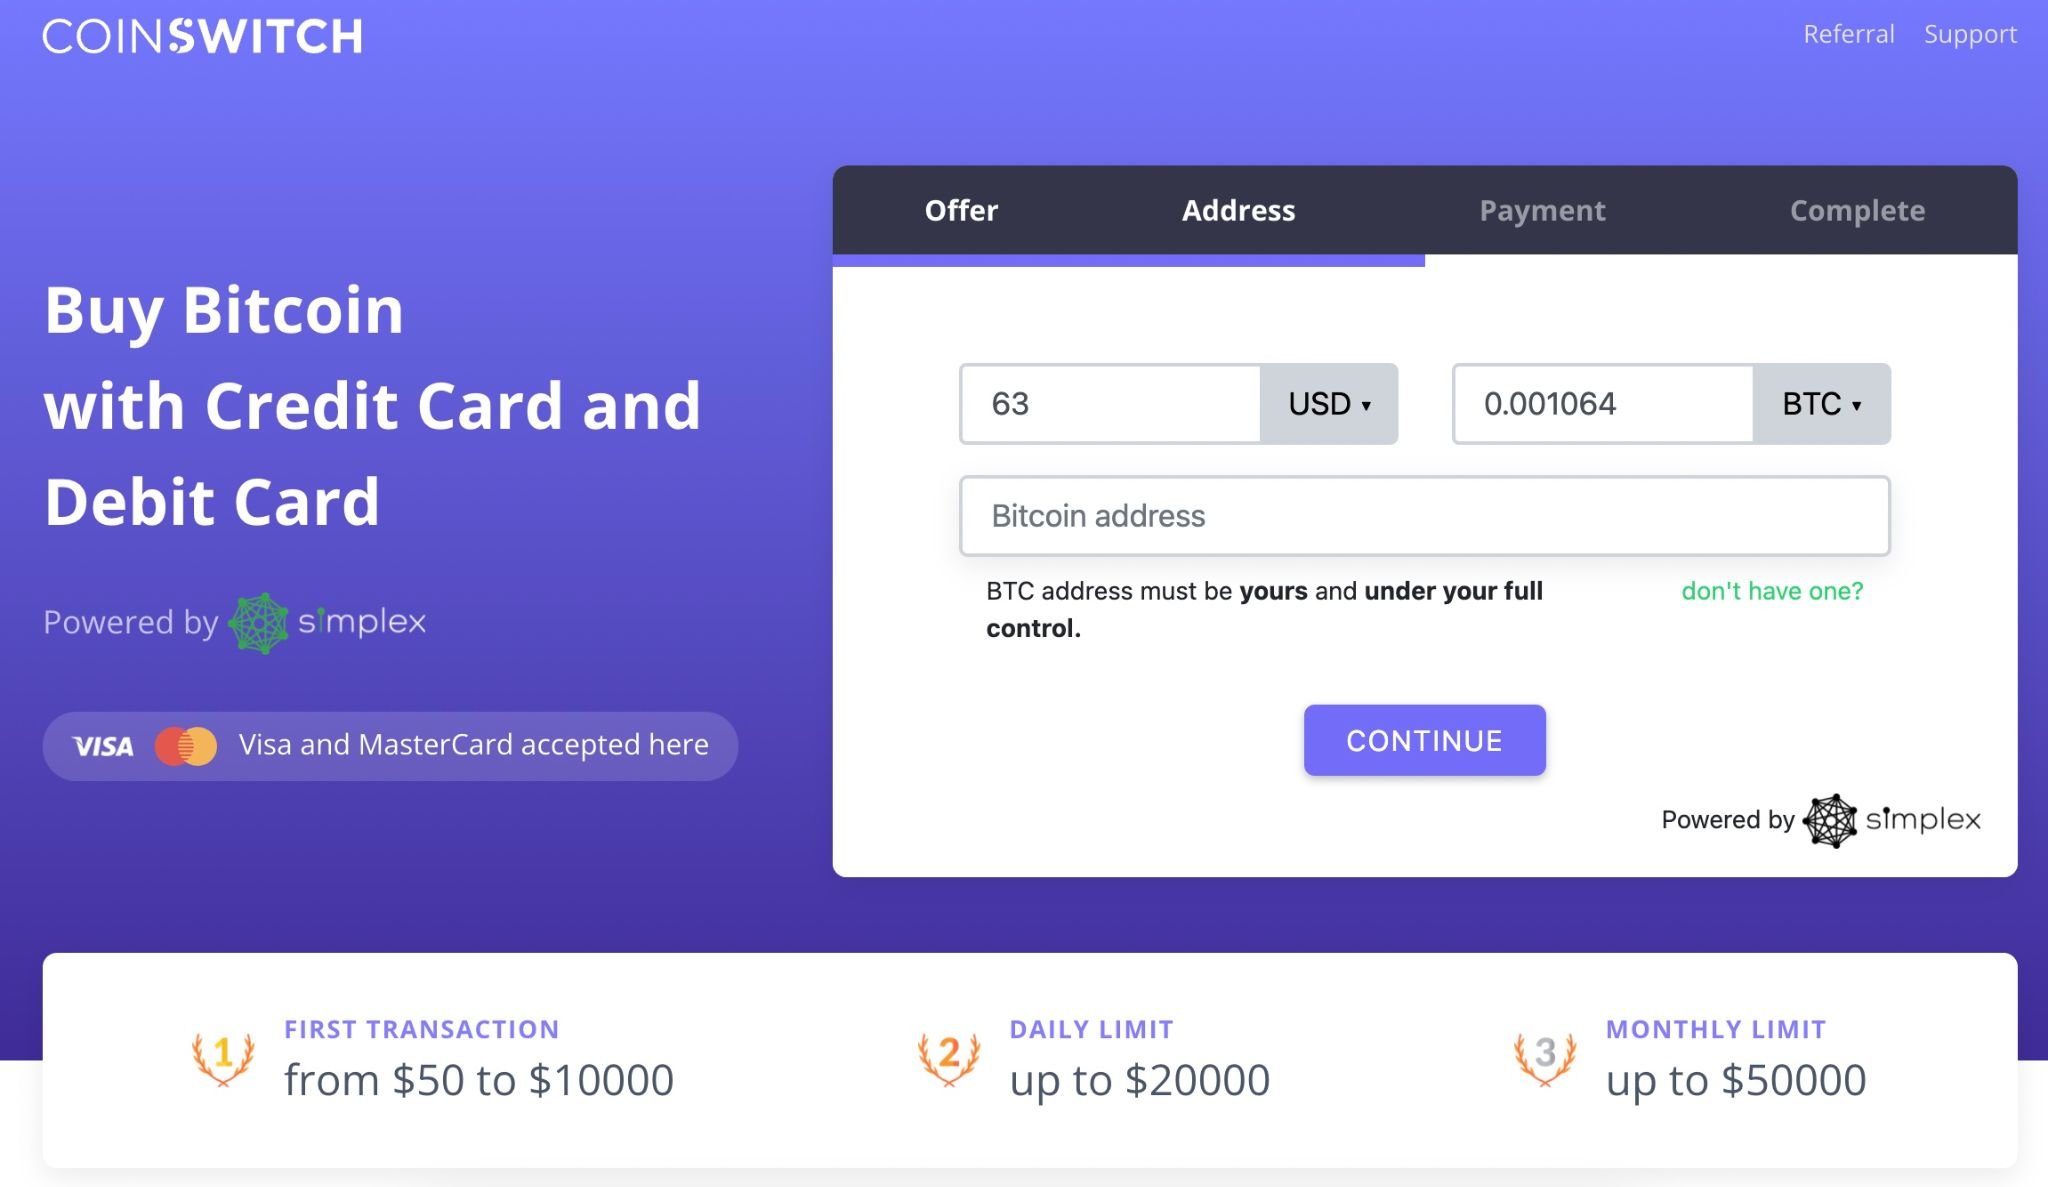 Buy Bitcoin with credit card and debit card on CoinSwitch